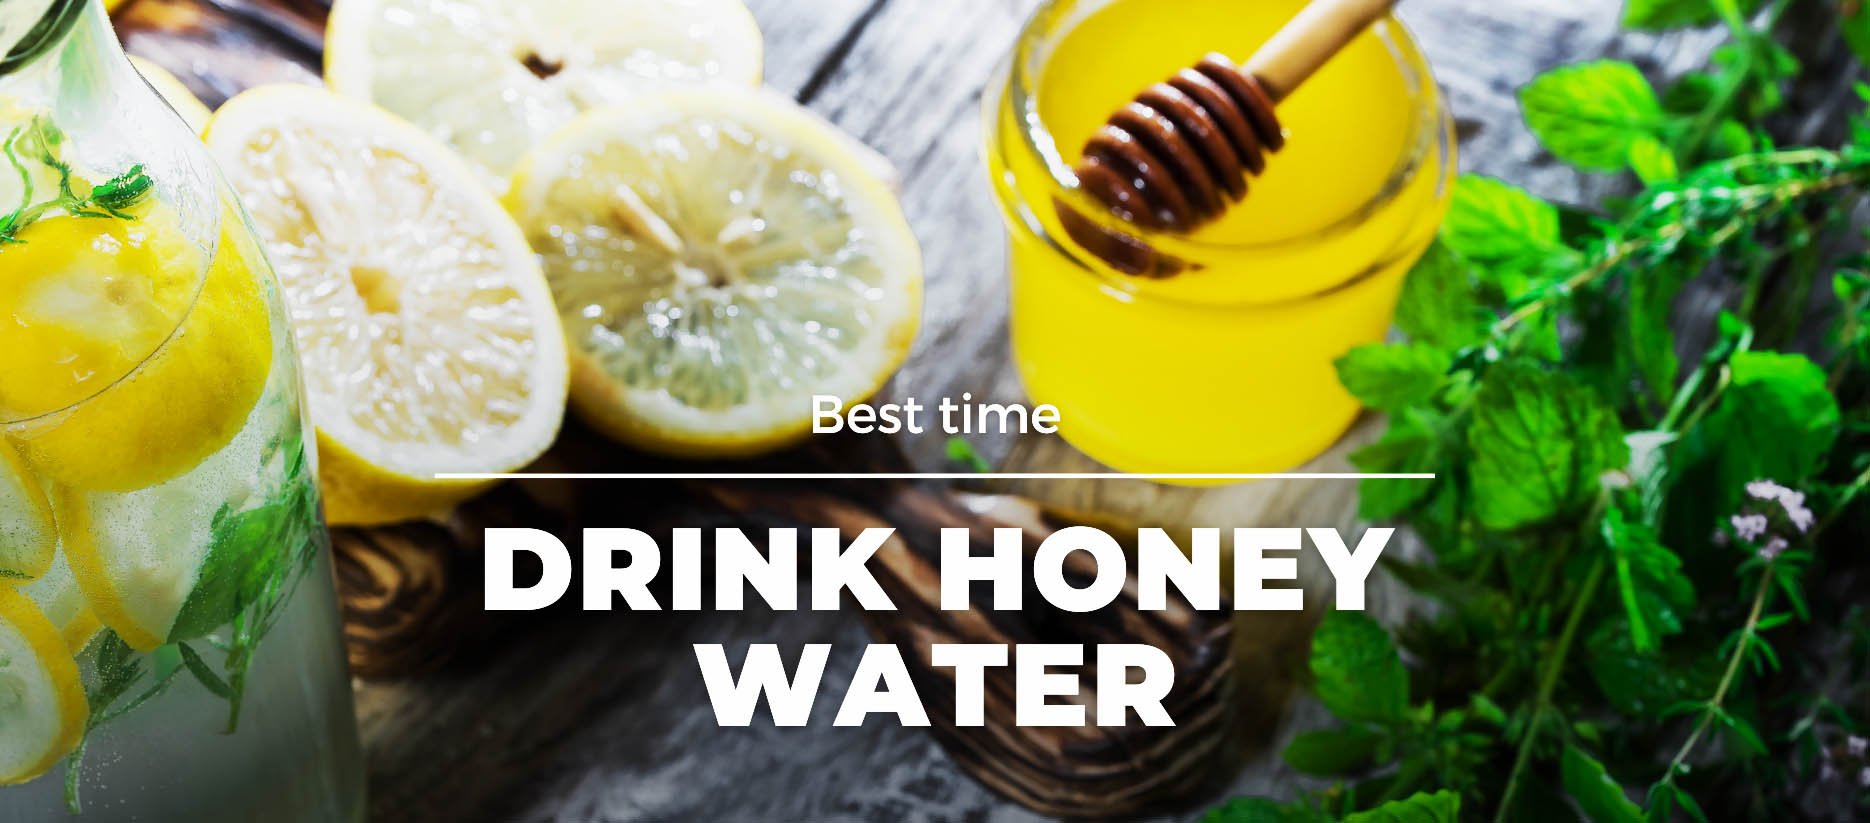 Best Time To Drink Honey Water And The Benefits | Stethostalk